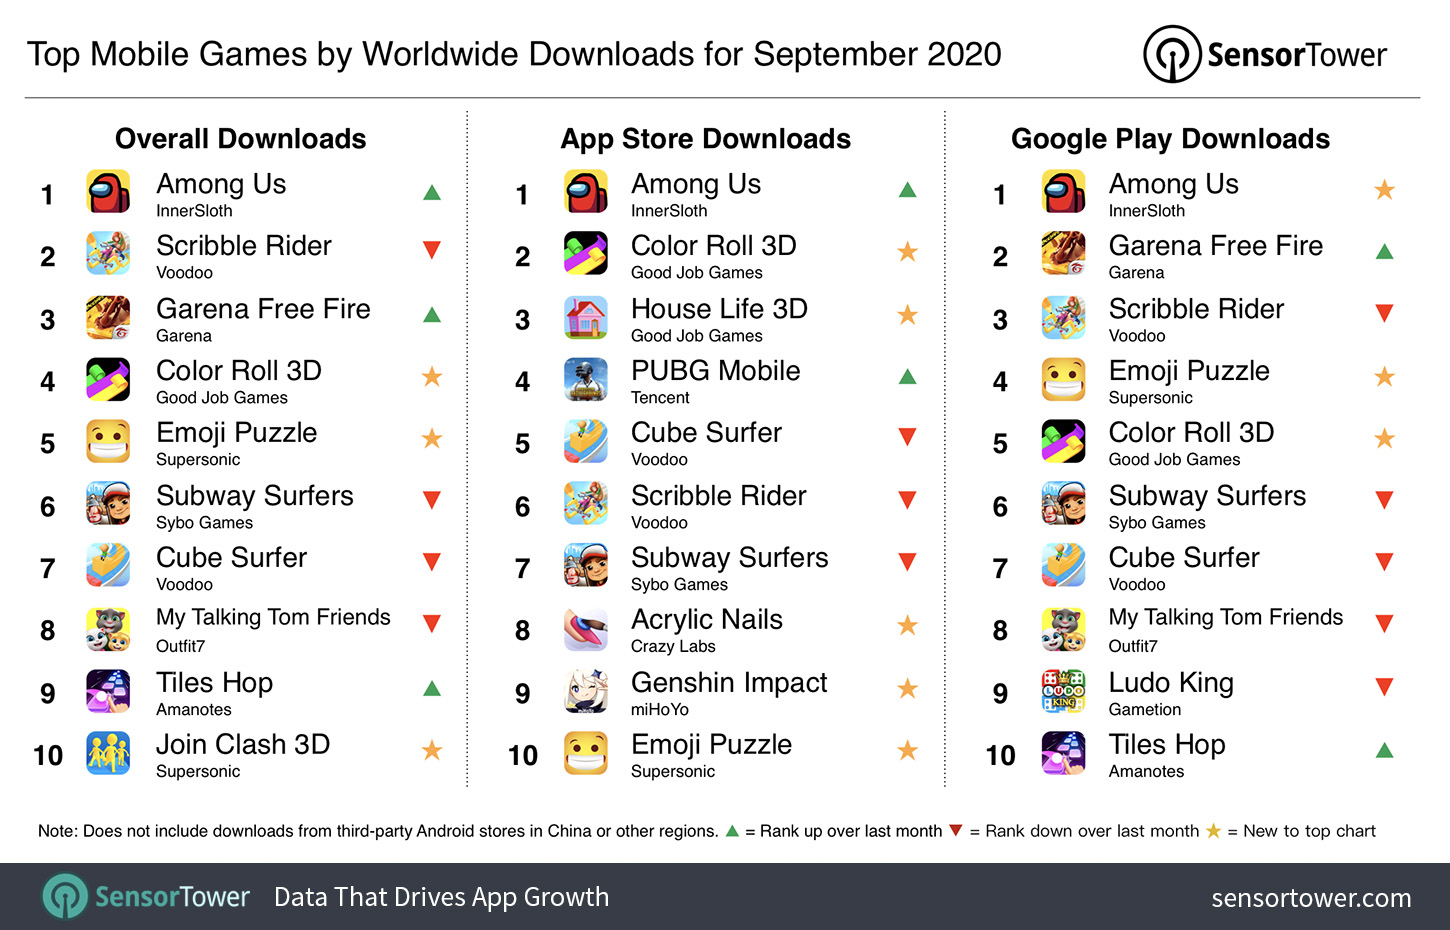 Top Mobile Games Worldwide for September 2020 by Downloads